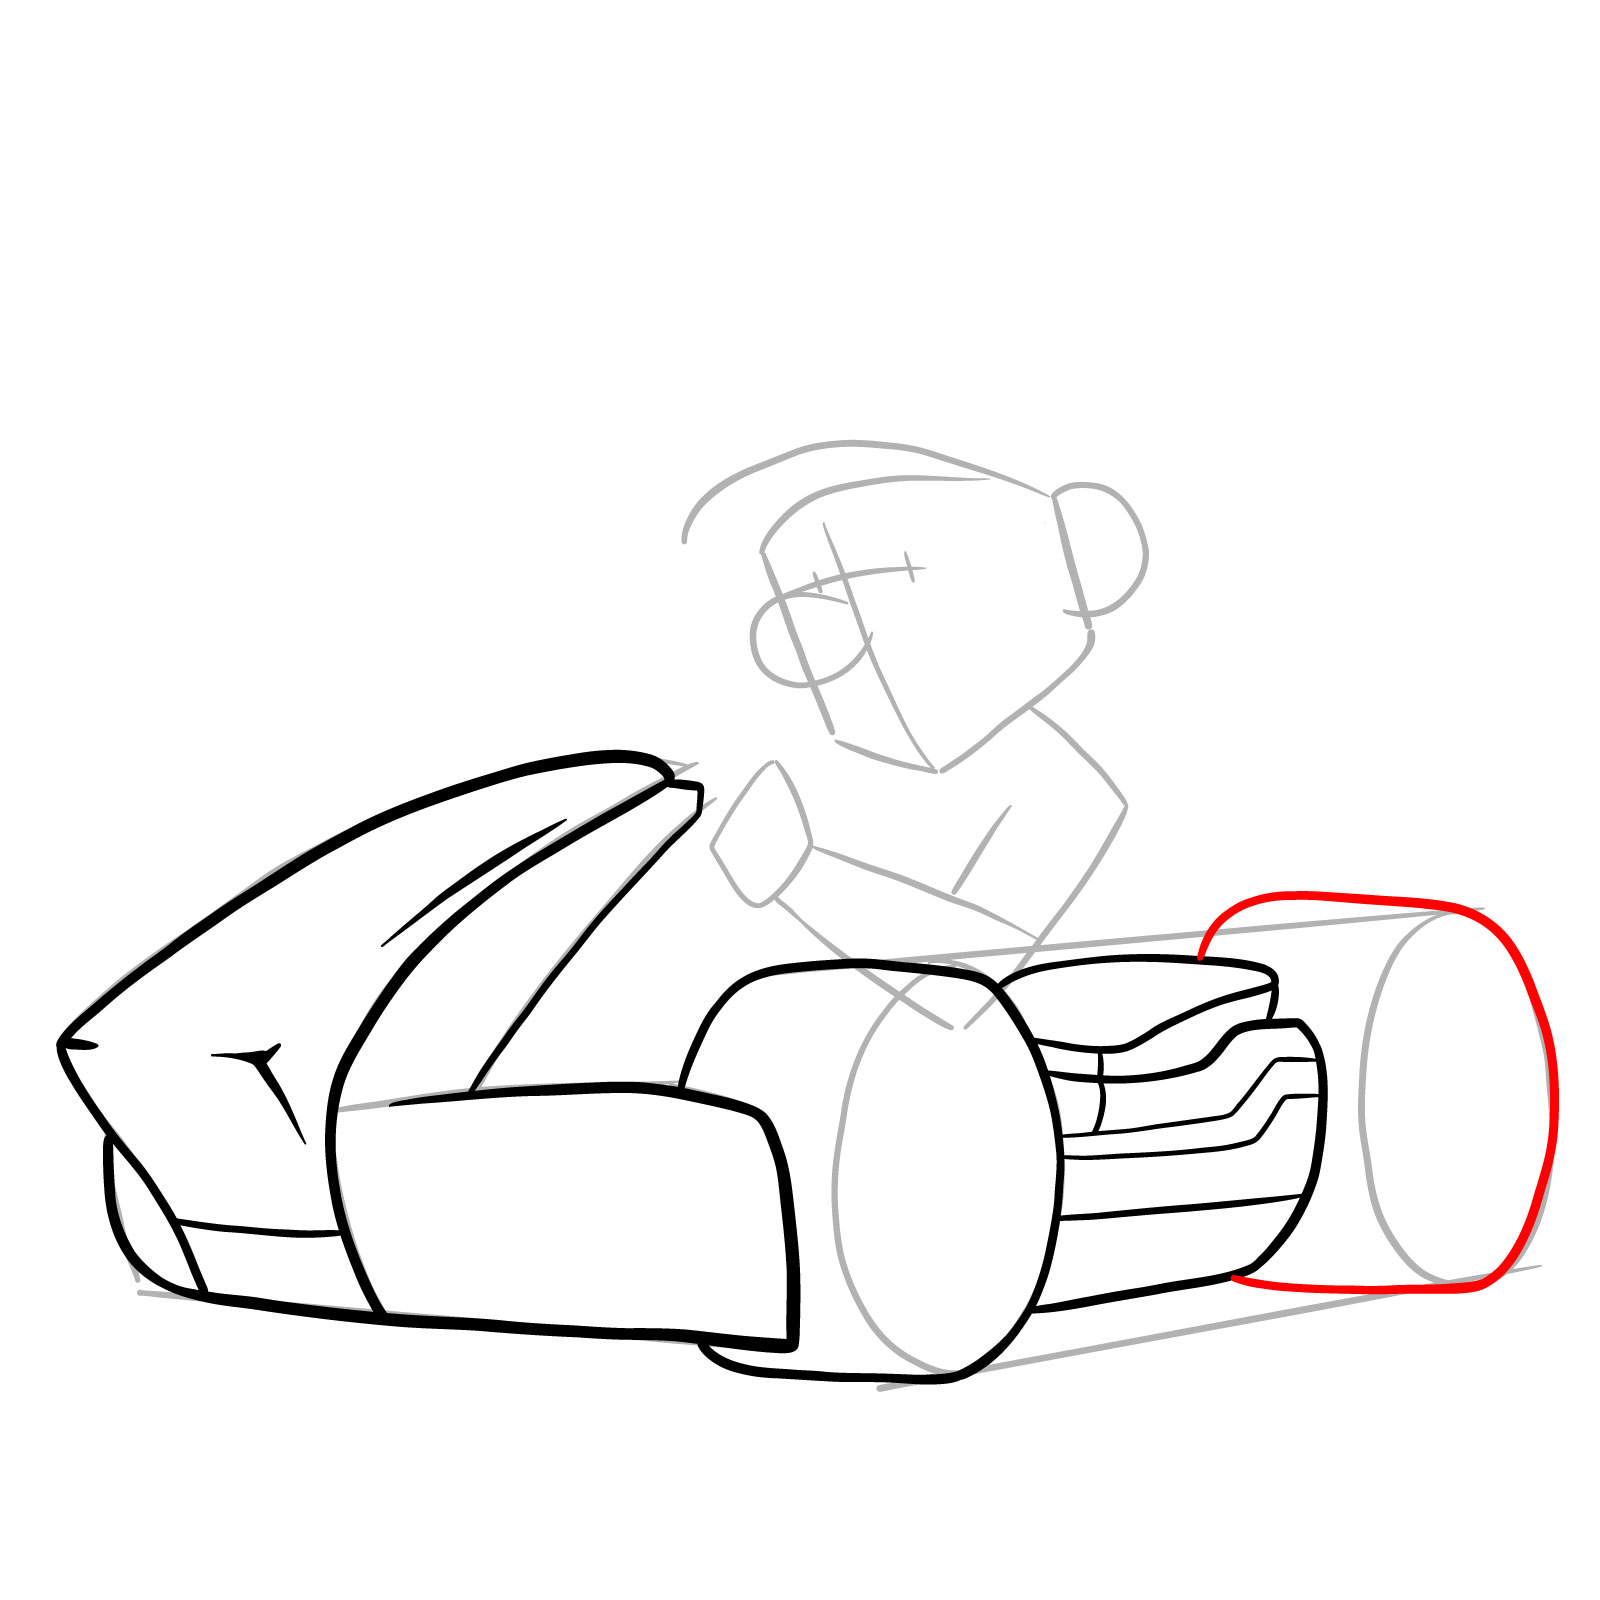 How to draw Race Traitors Mario - step 13